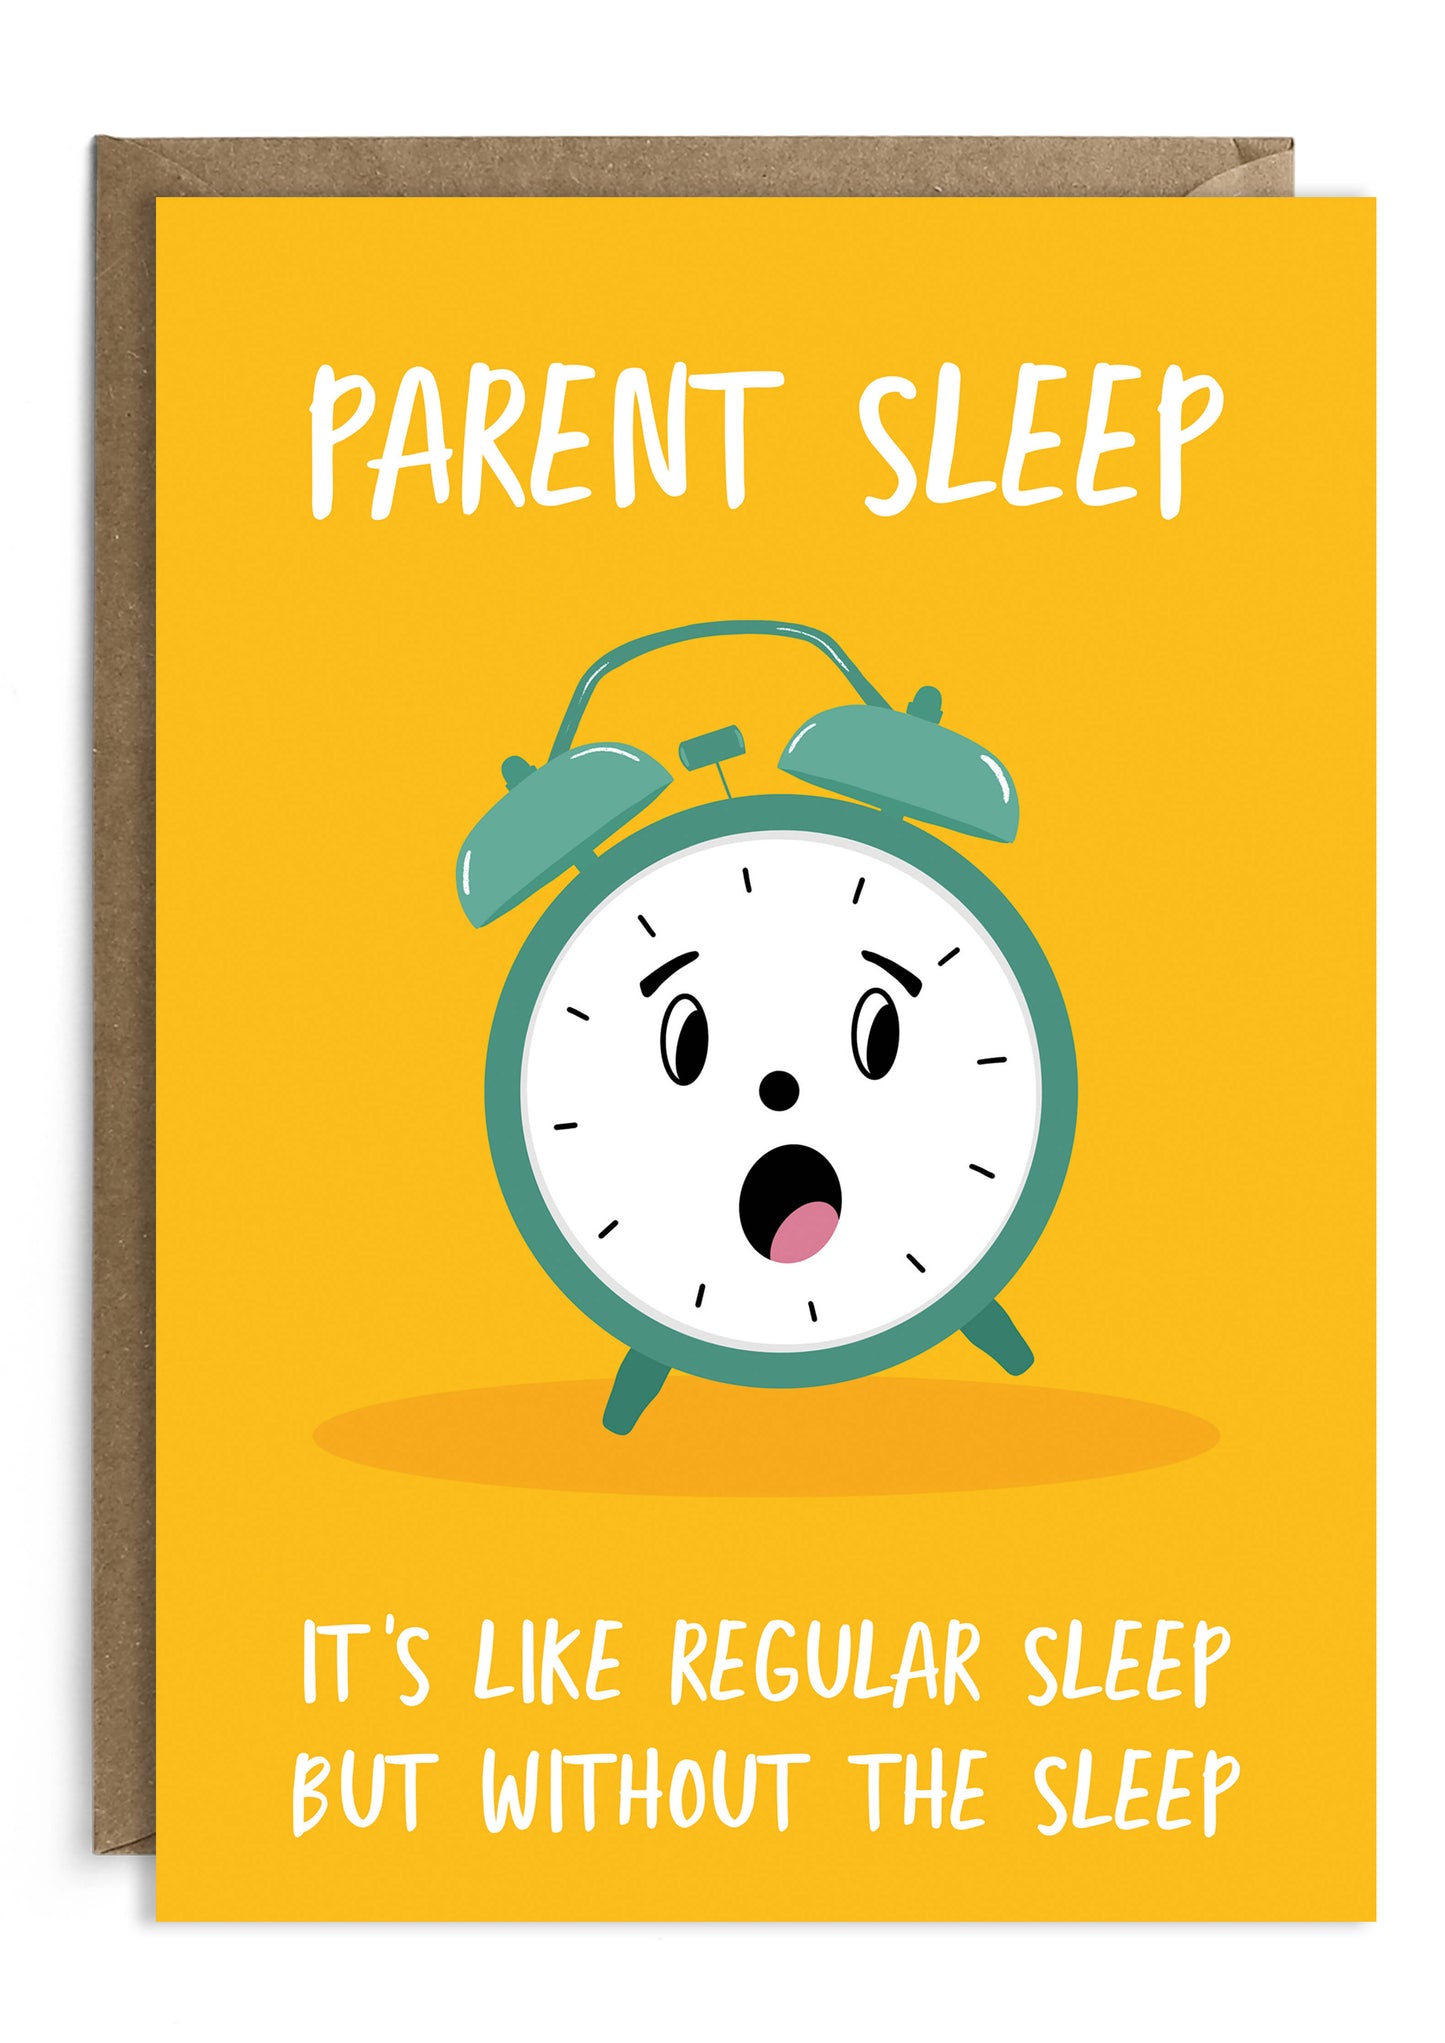 Funny new baby card making a joke about parent sleep, or no sleep.